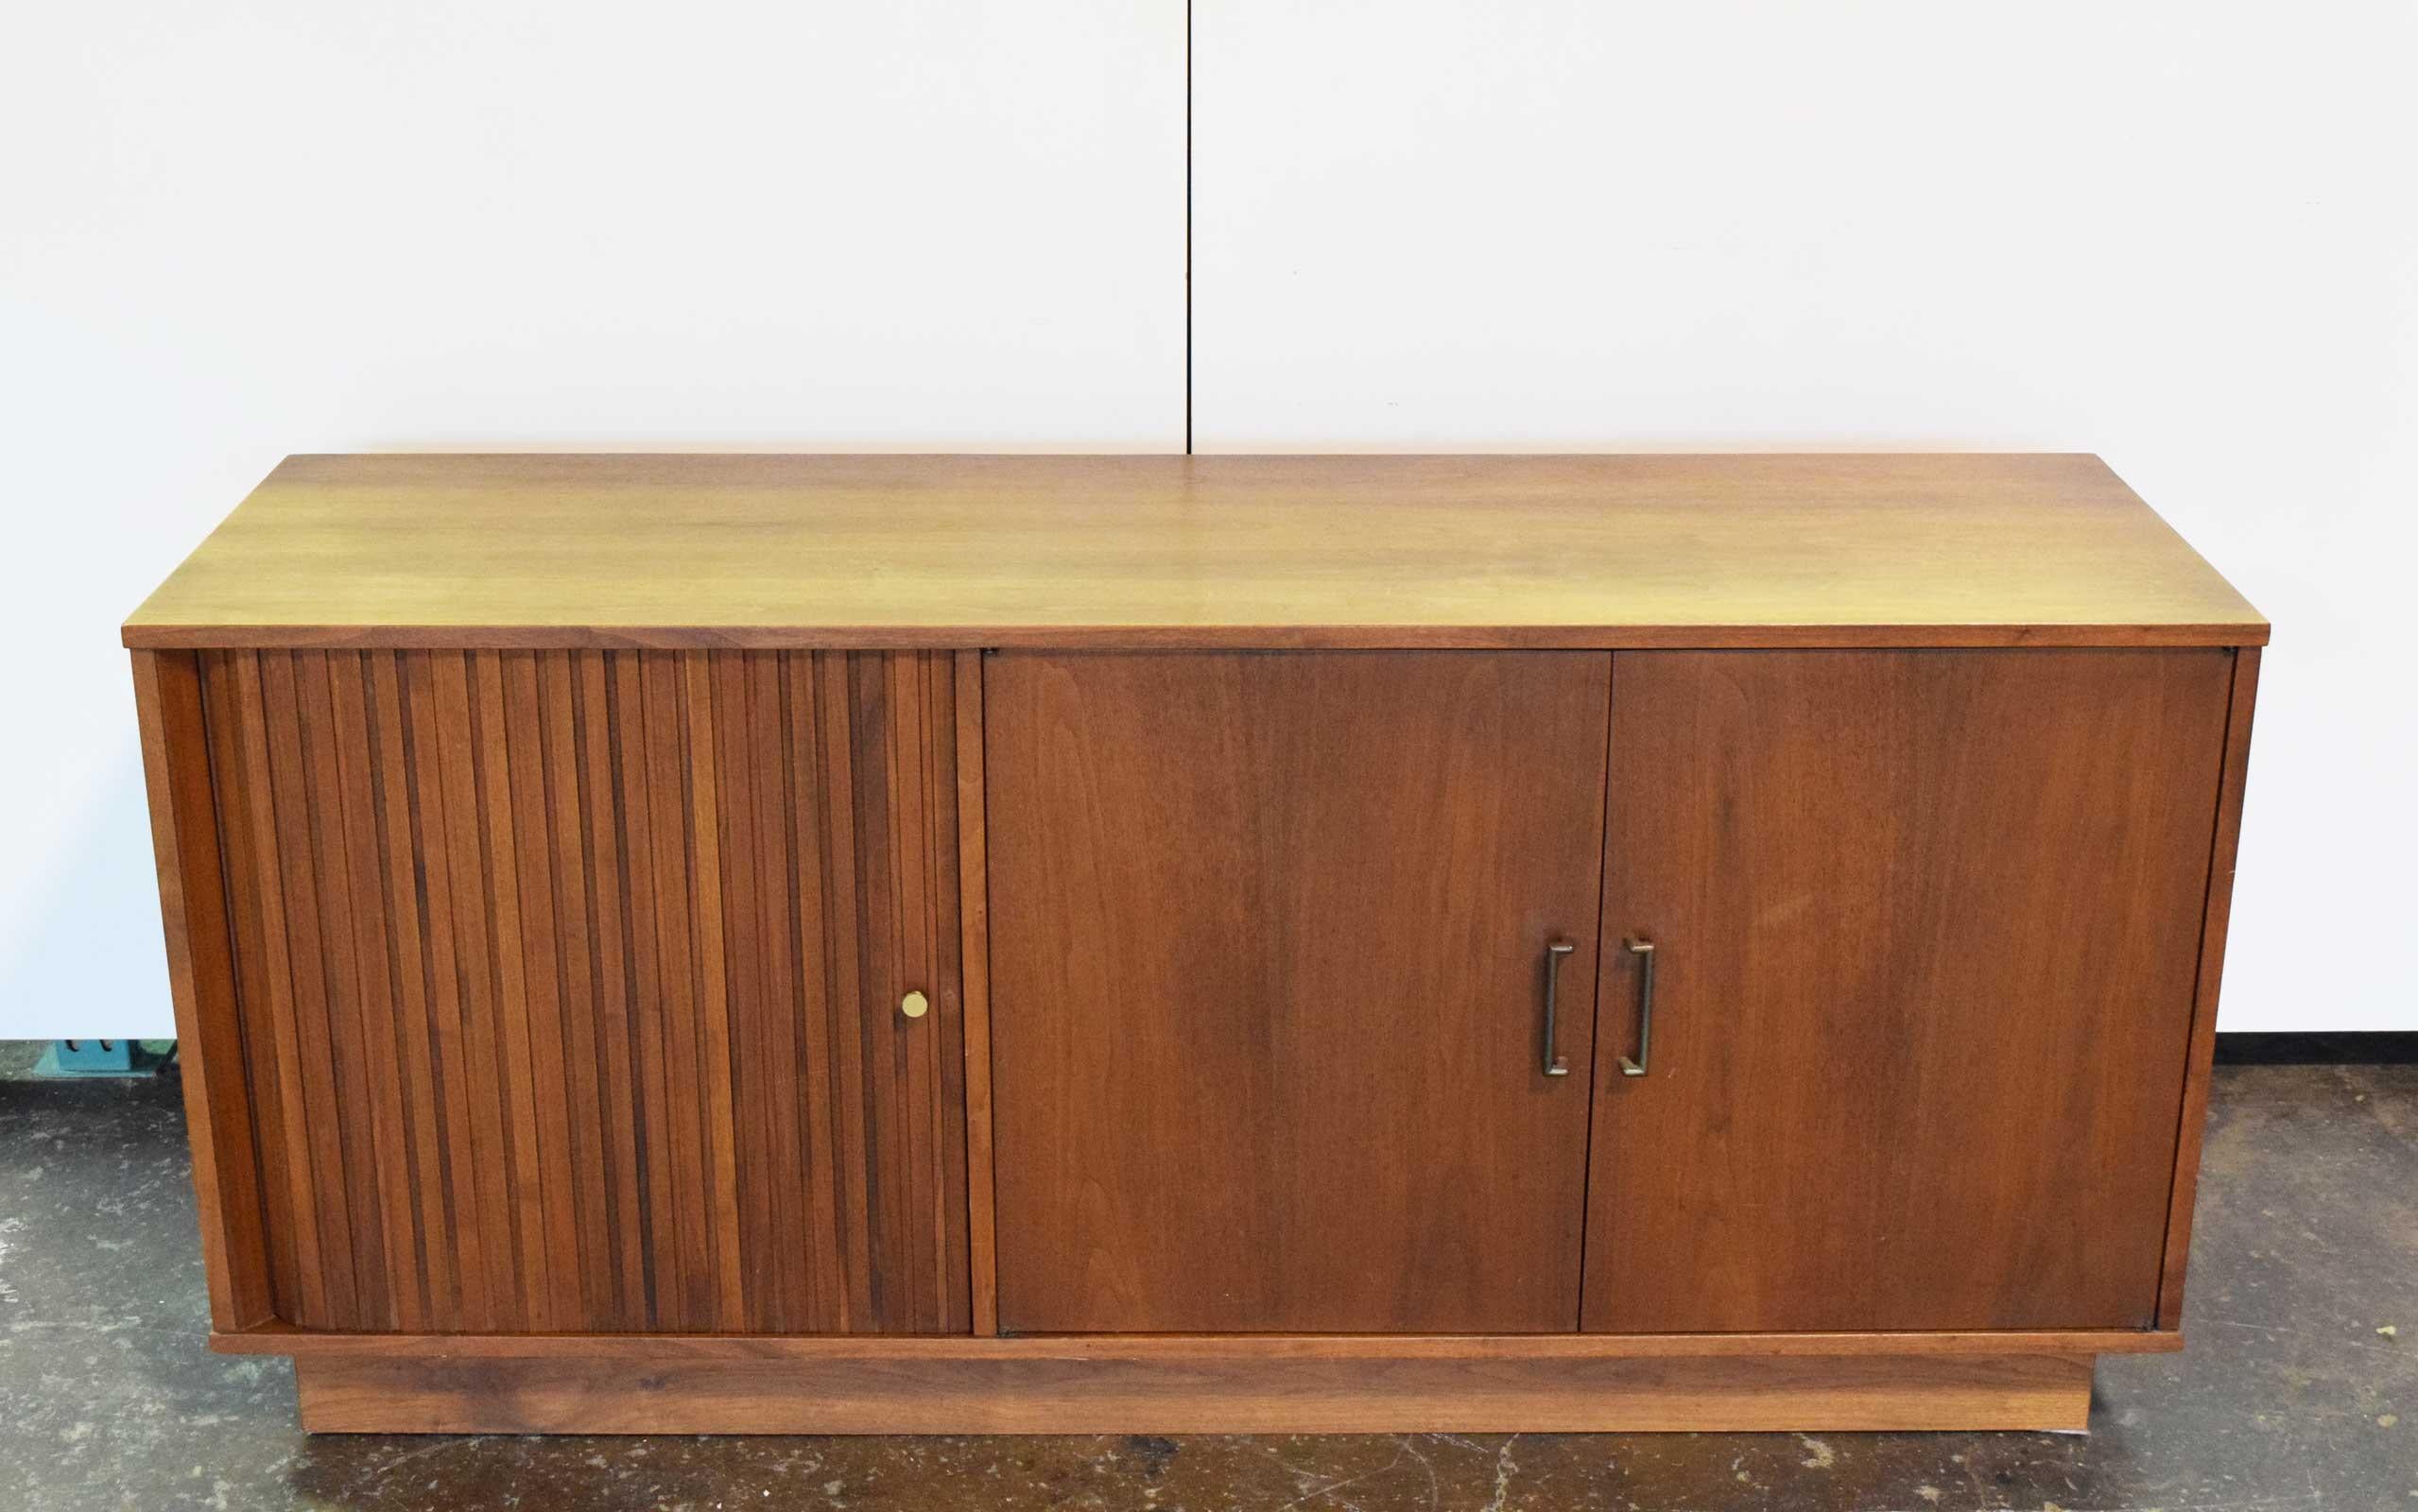 Sideboard has tambour door on one side with a shelf for TV and other side has shelving. Brass handles.